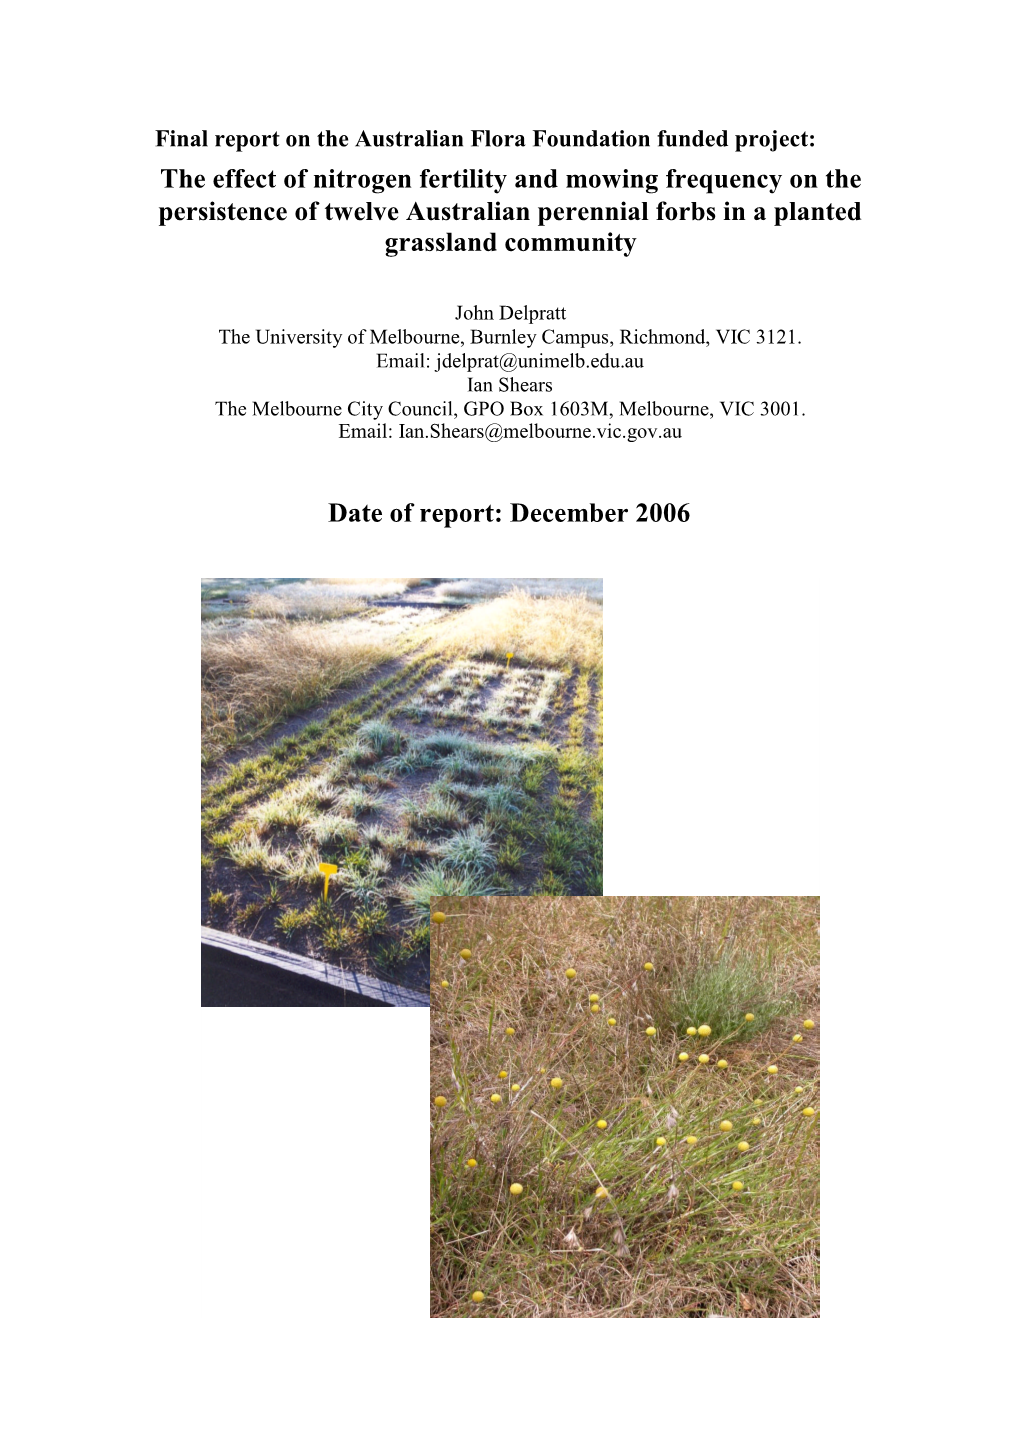 The Effect of Nitrogen Fertility and Mowing Frequency on the Persistence of Twelve Australian Perennial Forbs in a Planted Grassland Community